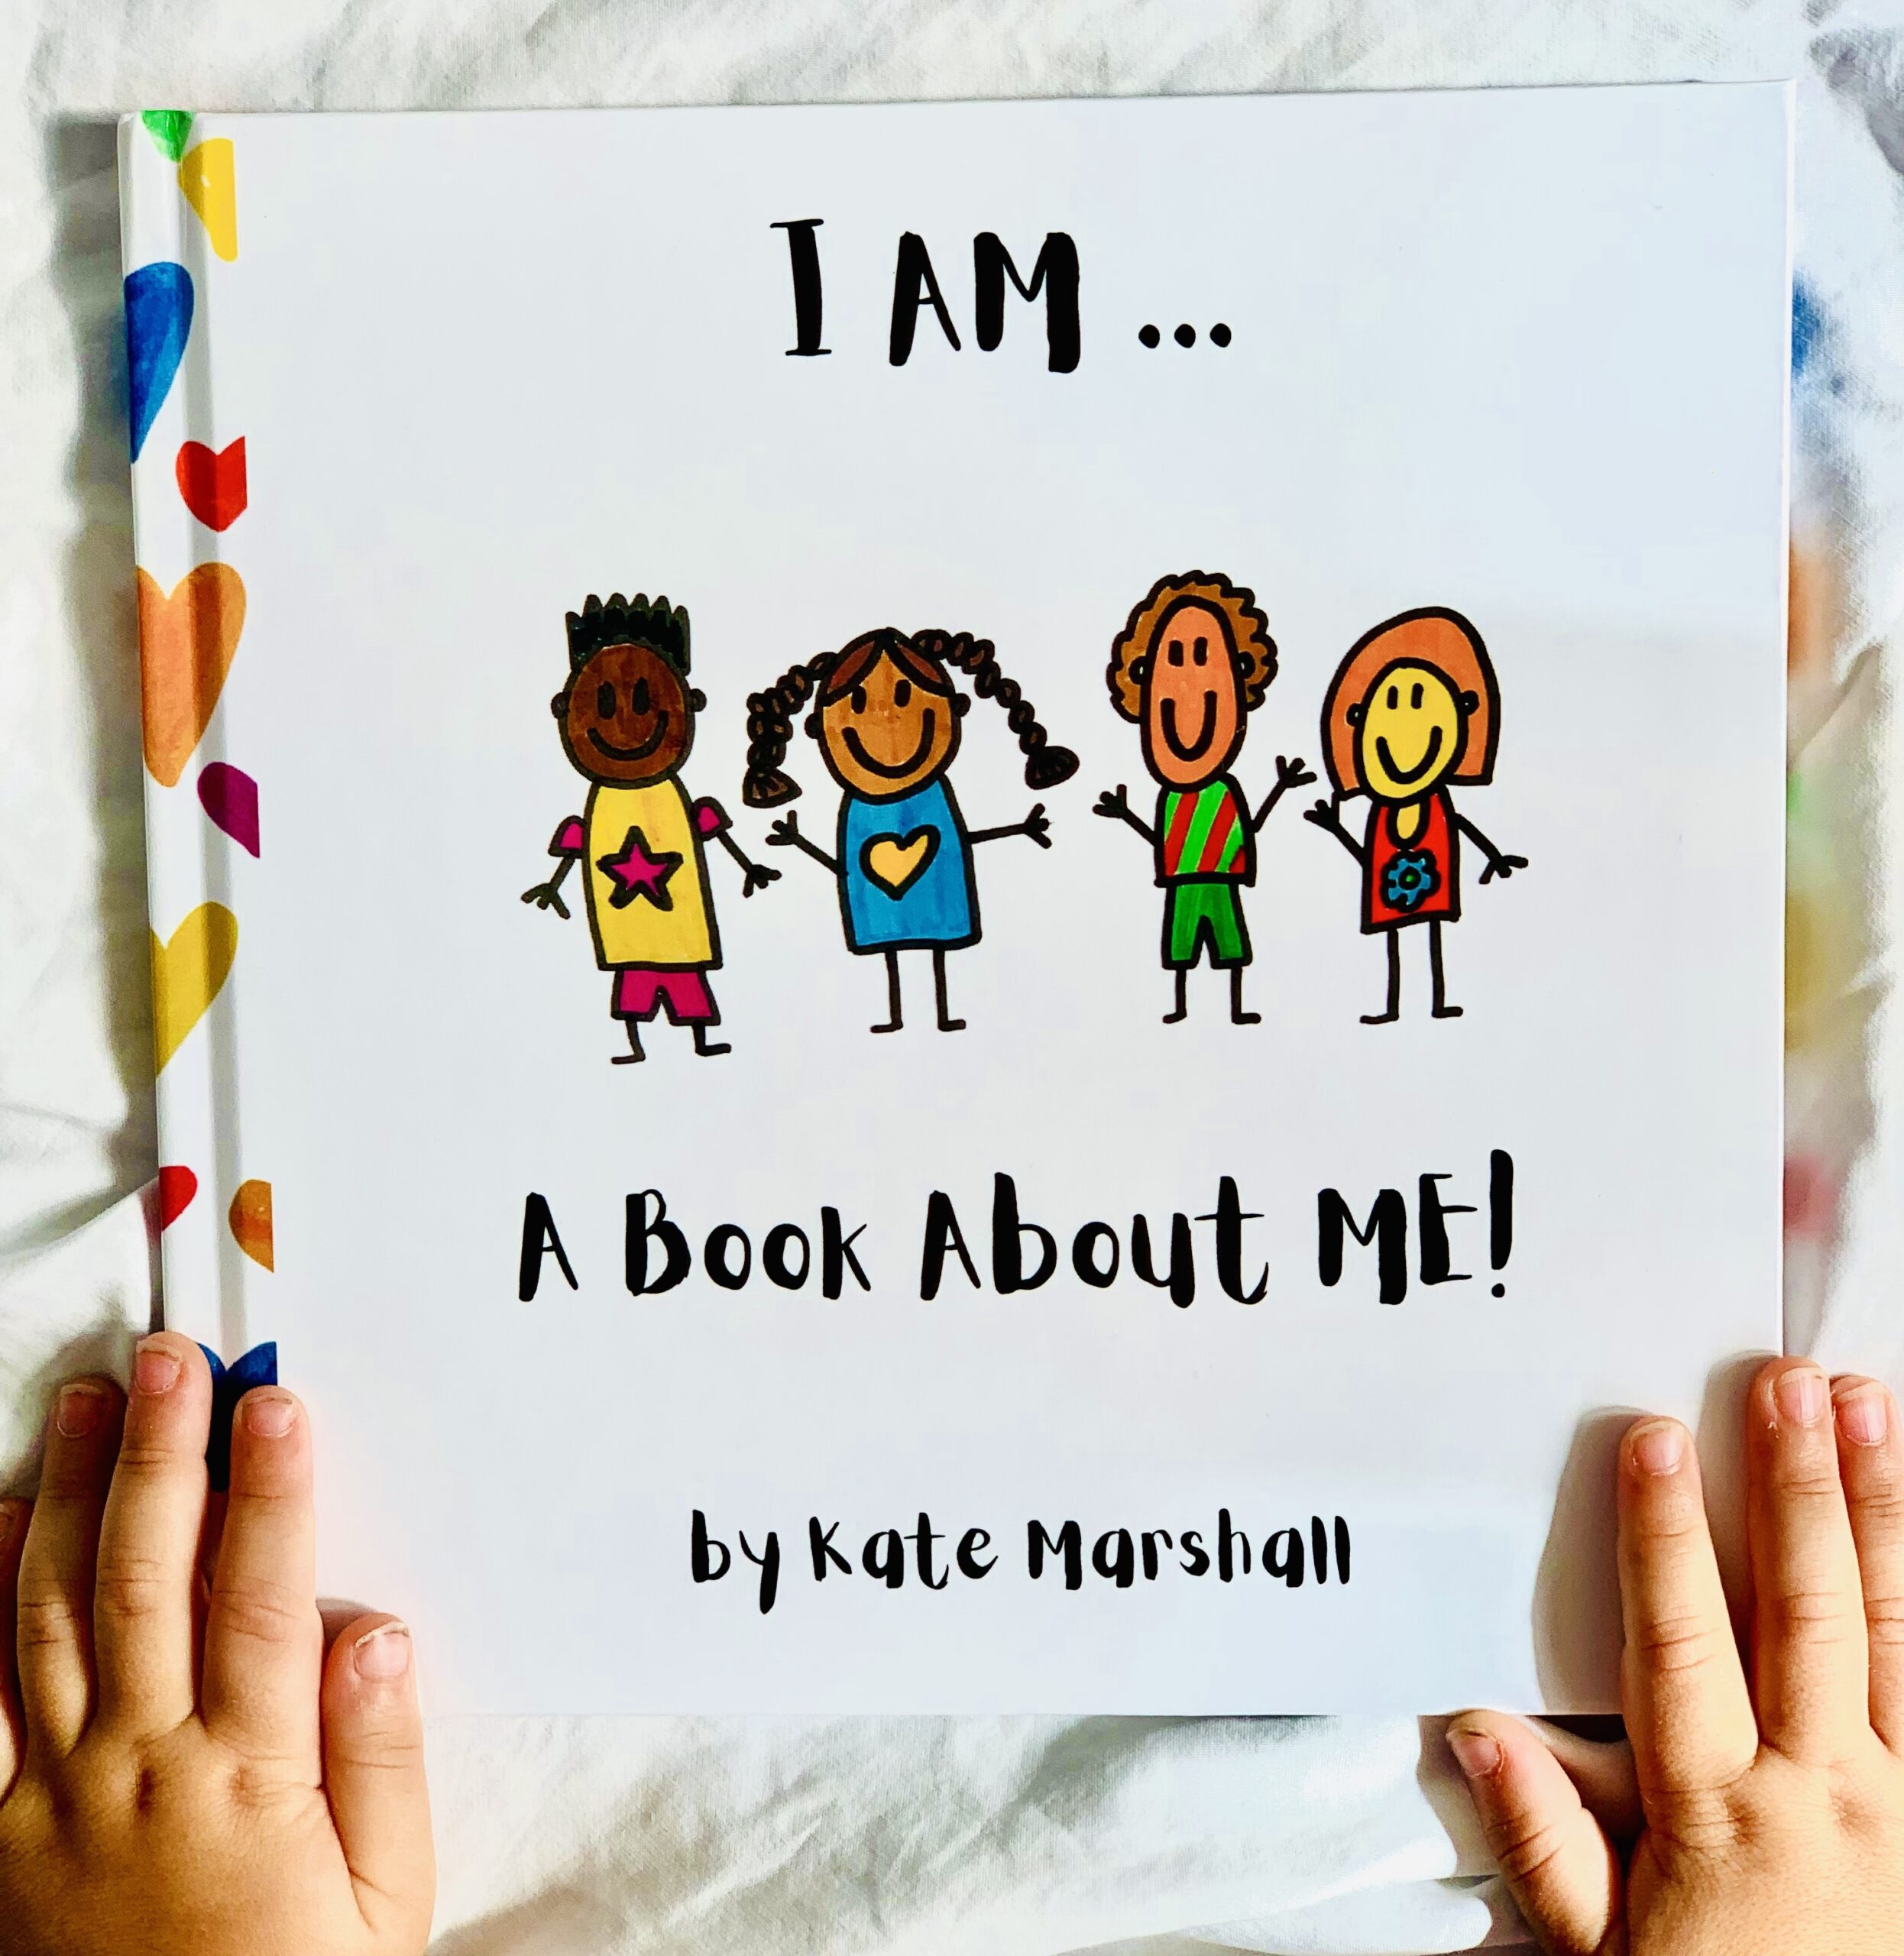 I AM… A Book About ME!